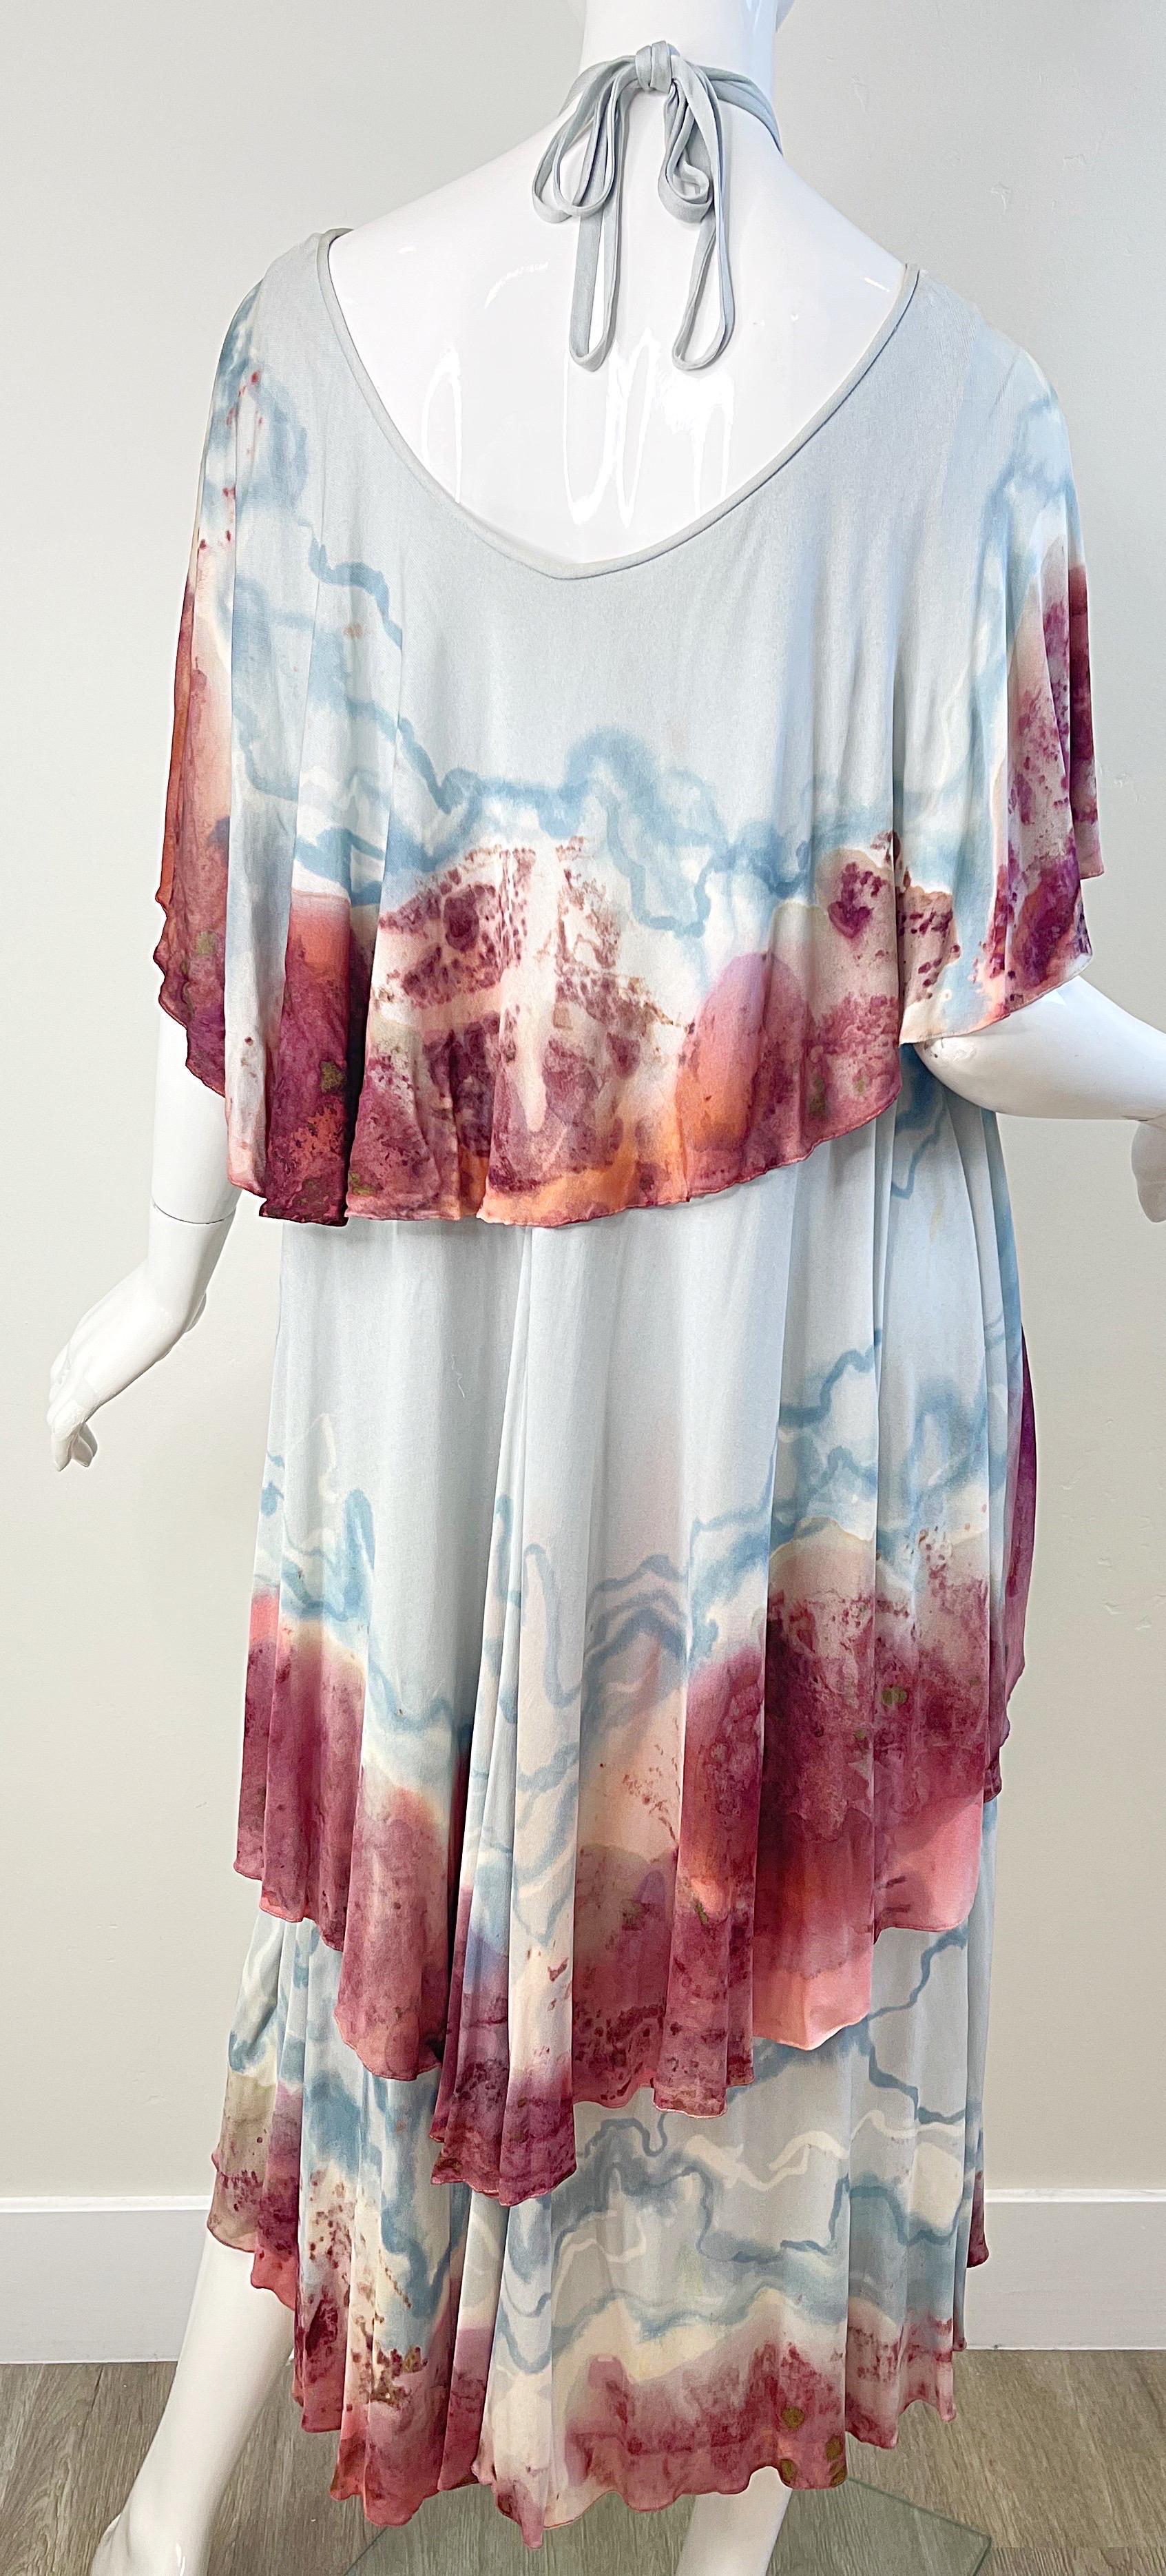 1970s Holly’s Harp Rare Hand Tie Dyed Marble Silk Jersey Vintage 70s Boho Dress For Sale 7